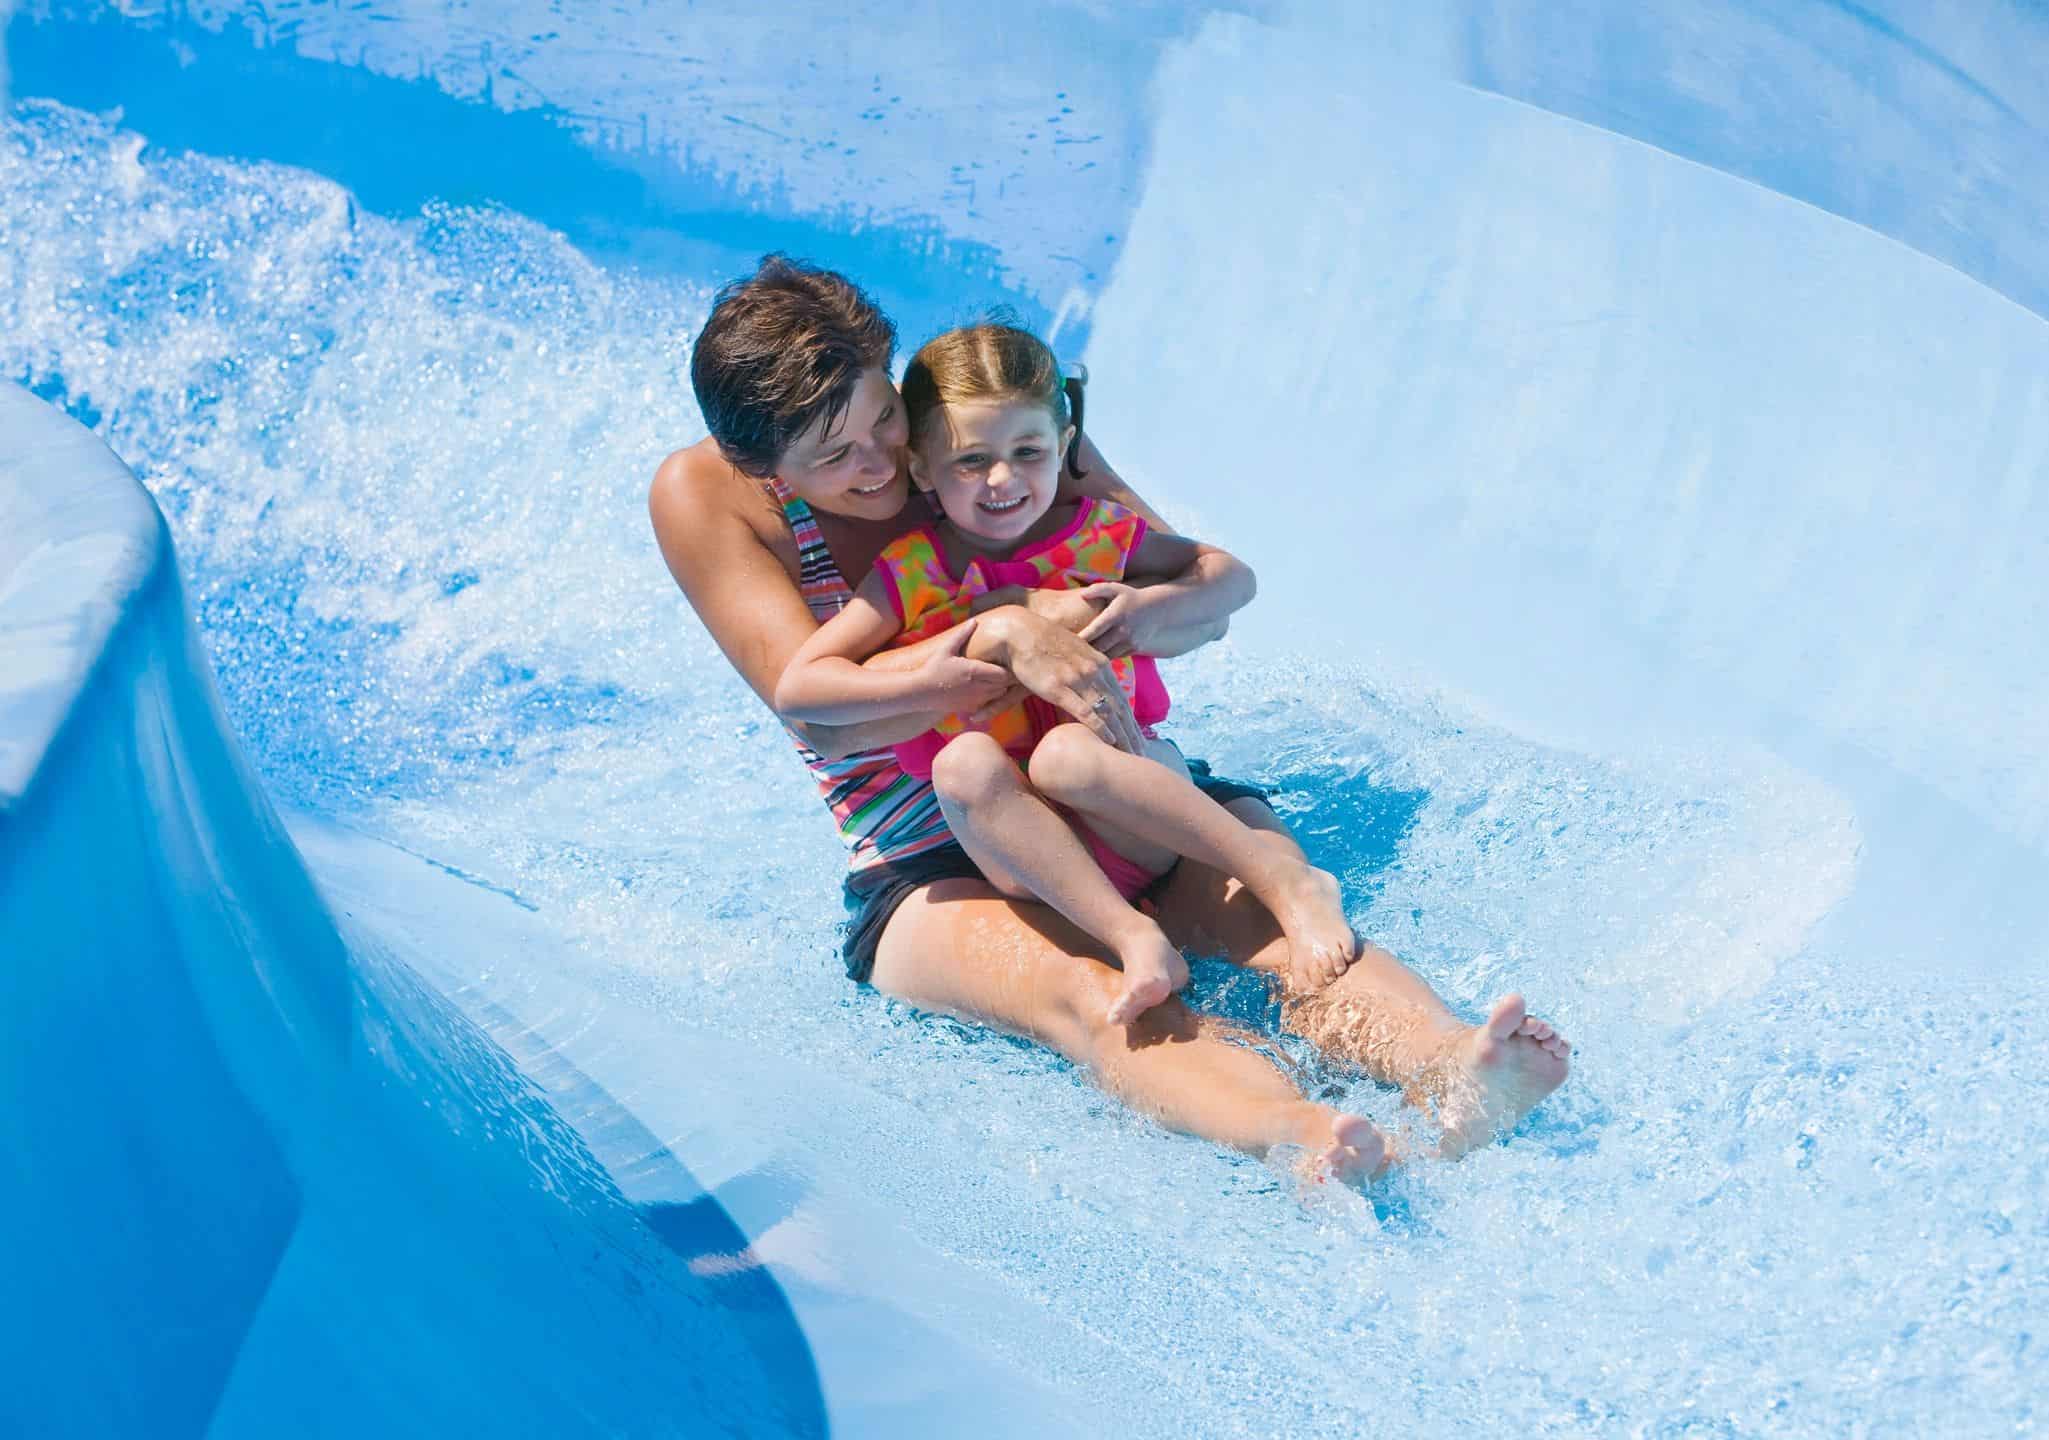 Are Waterparks and Swimming Pools Dangerous?